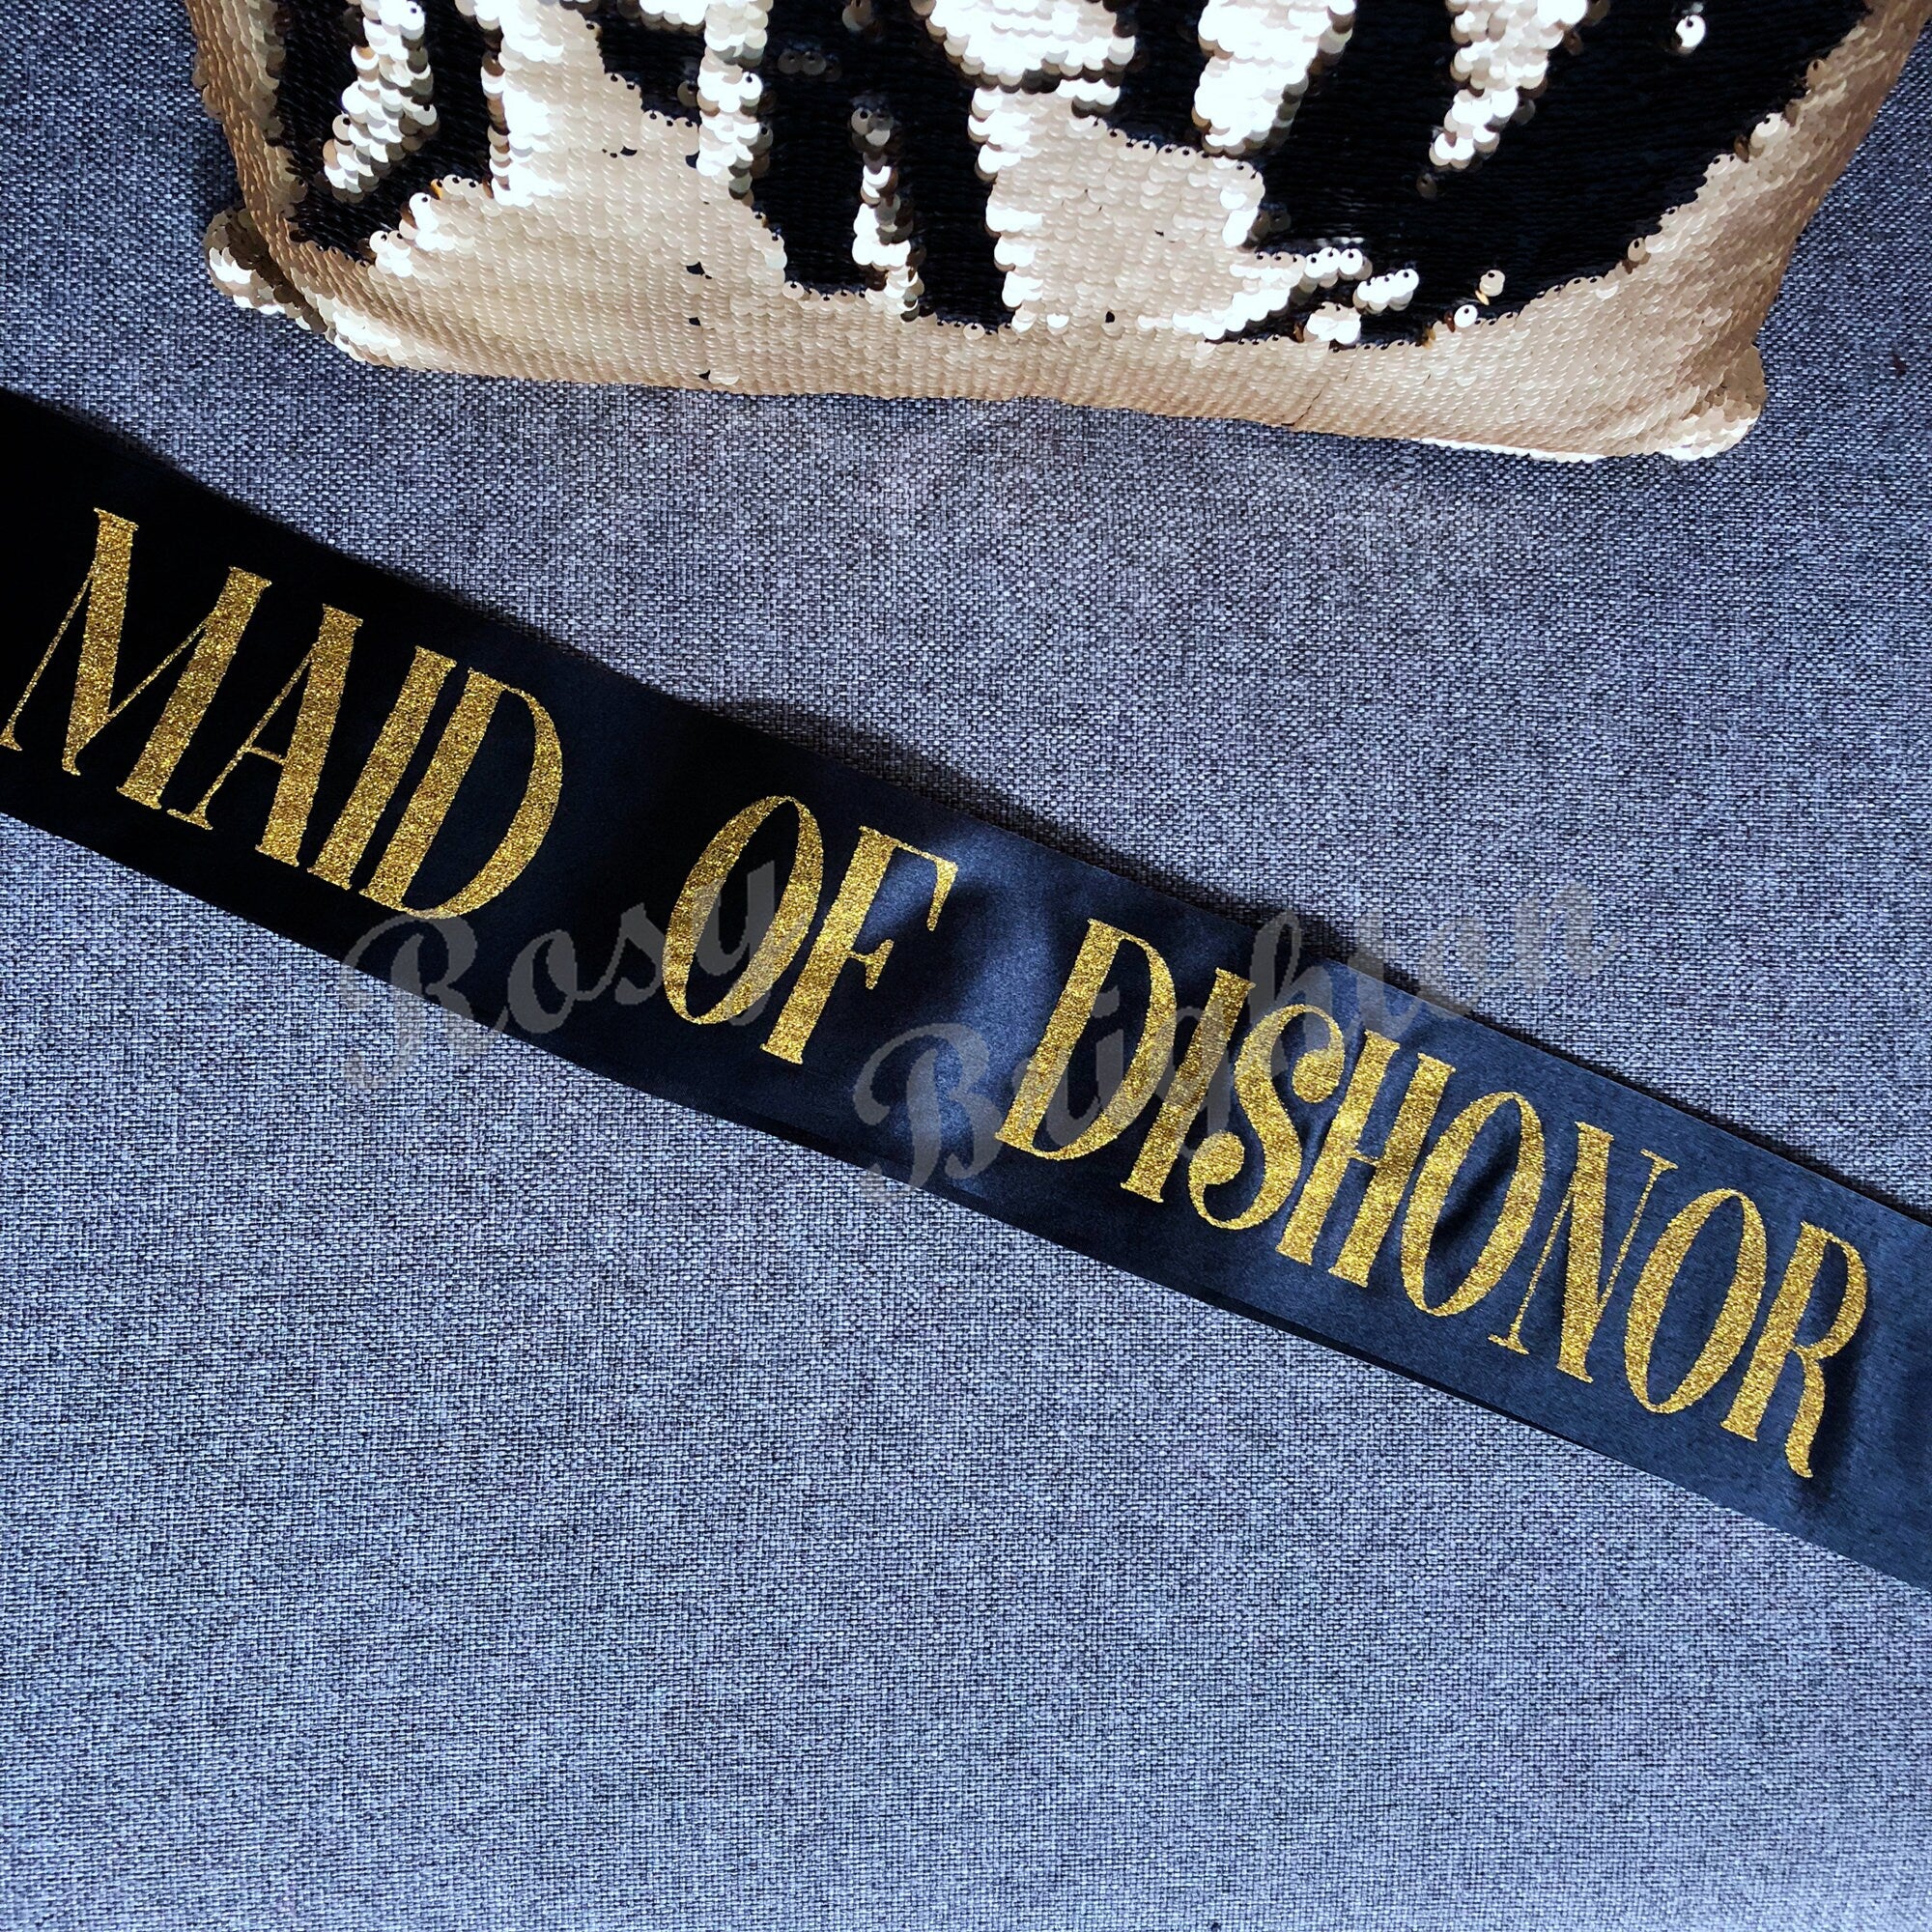 Bridal Sashes |Bride to Be | Bad Influence | Maid of Dishonor | Designated Drunk | Shot Queen | Hot Mama | Dancing Diva | Hen Bachelorette